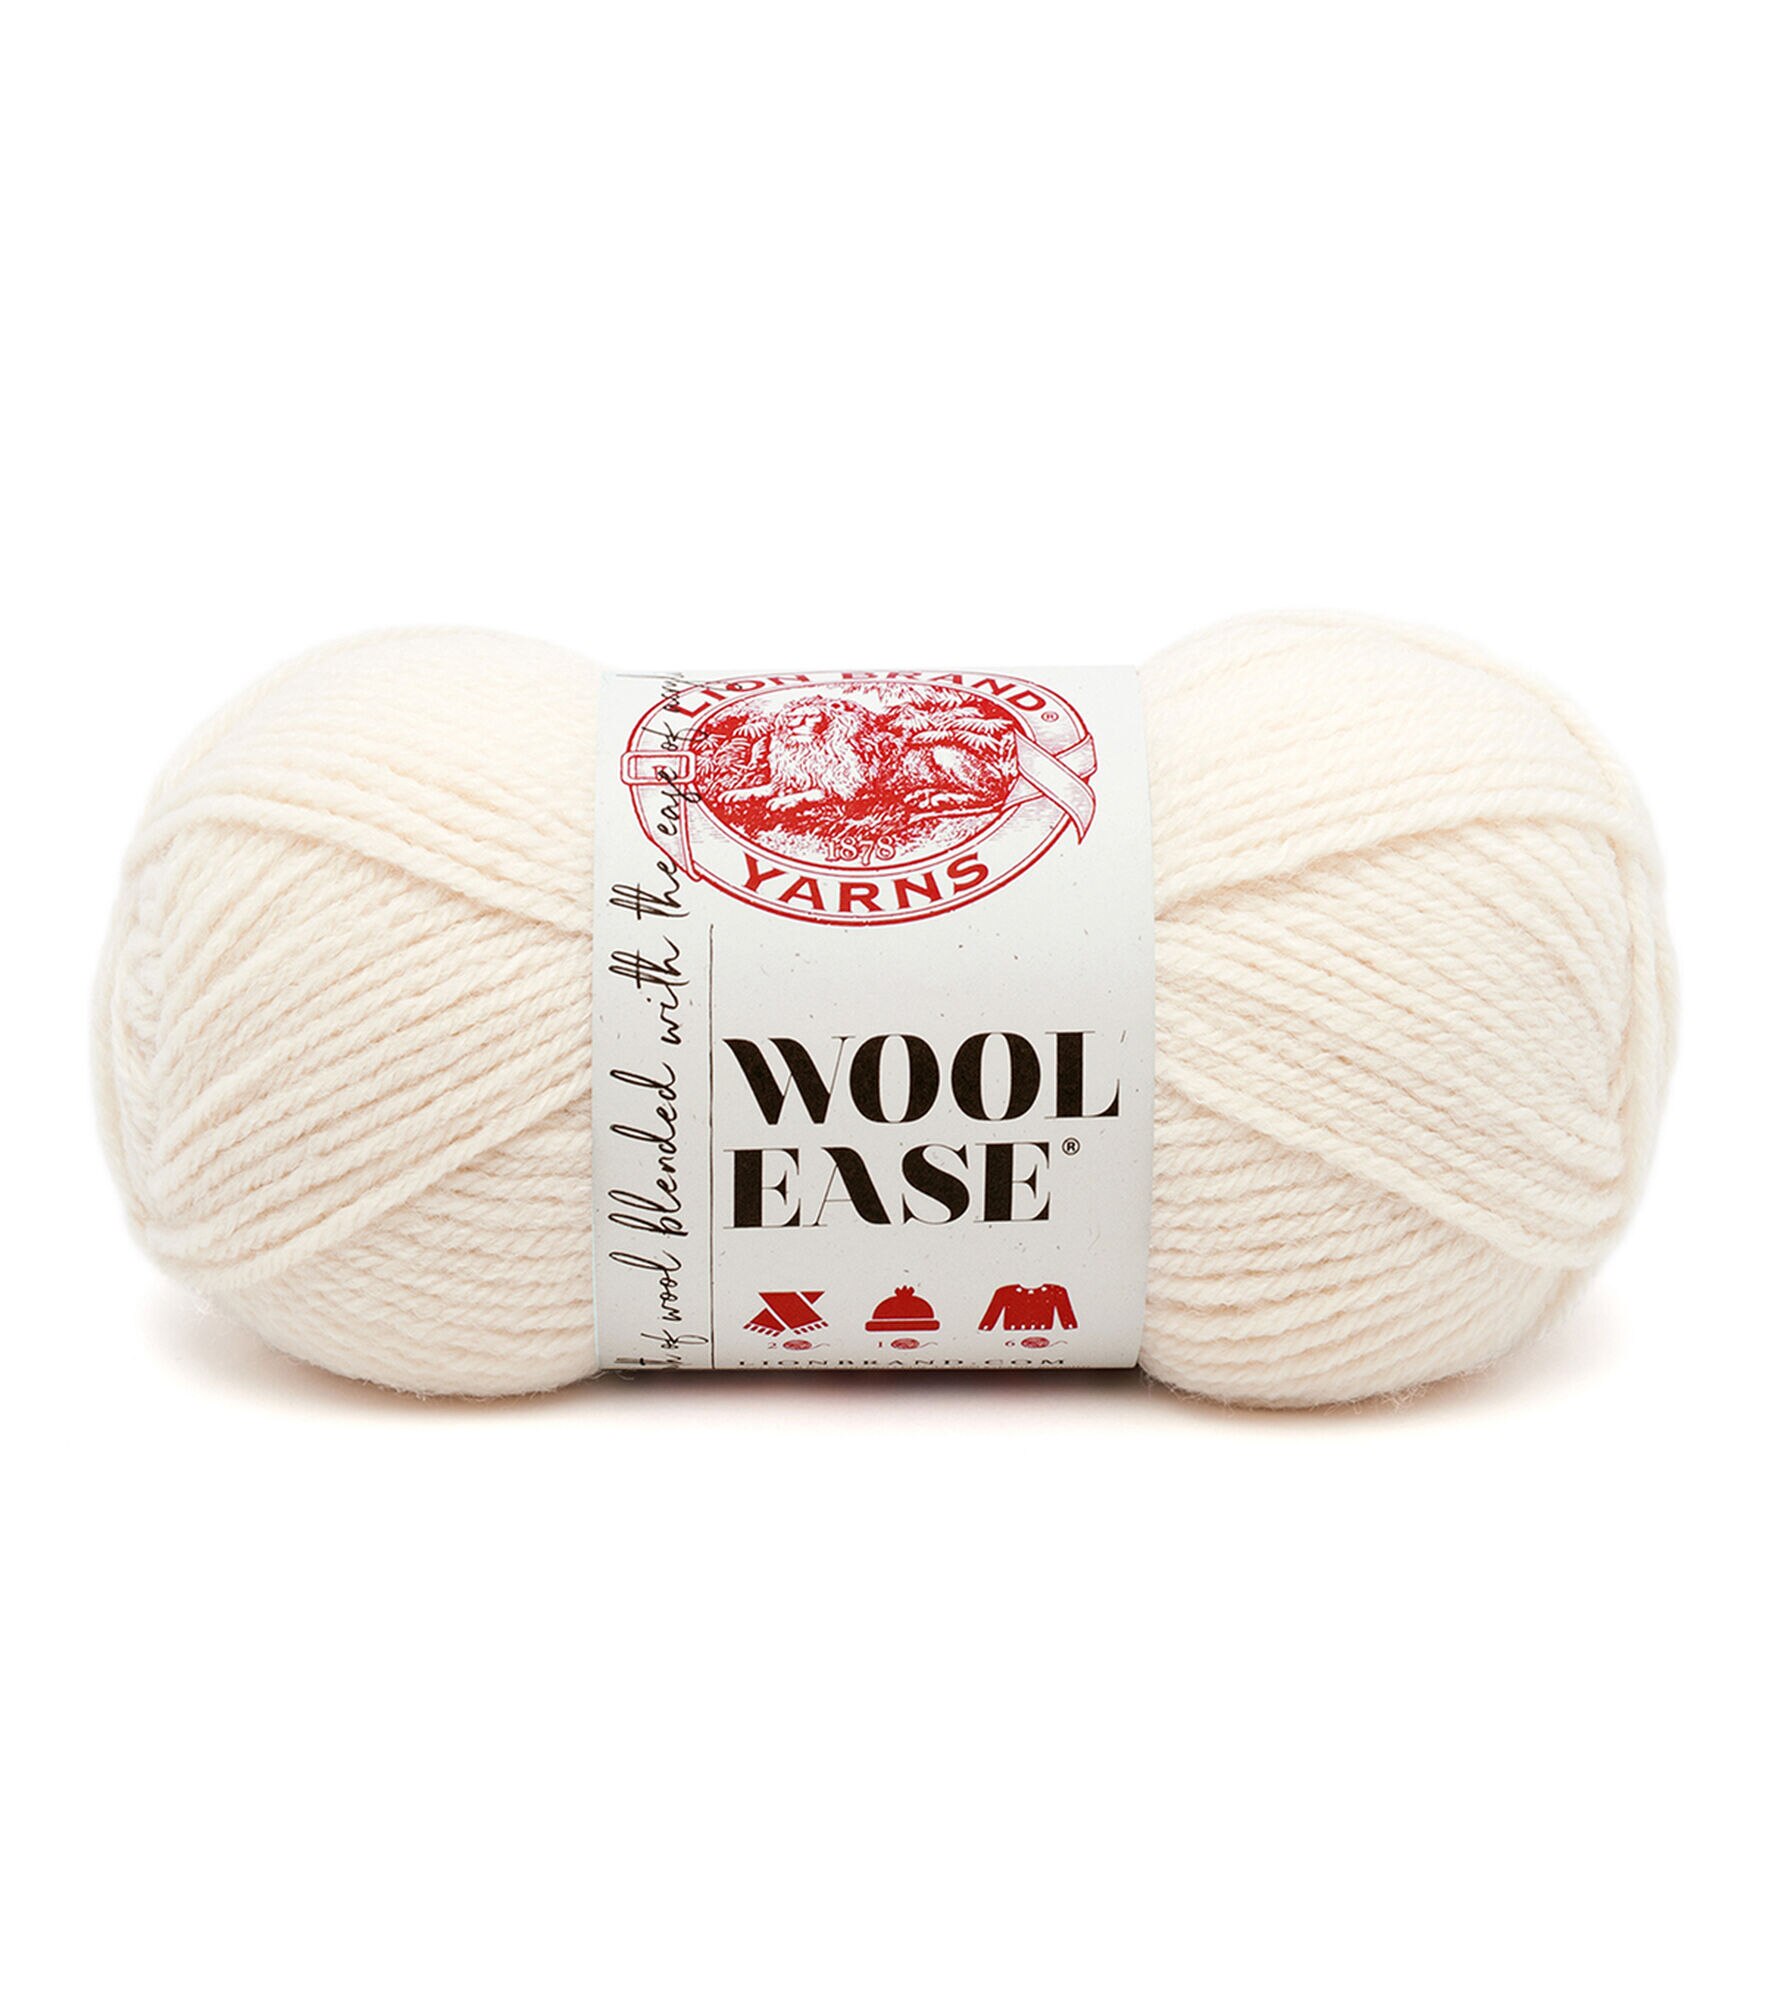 Lion Brand Yarn Wool Ease Thick & Quick Available In Multiple